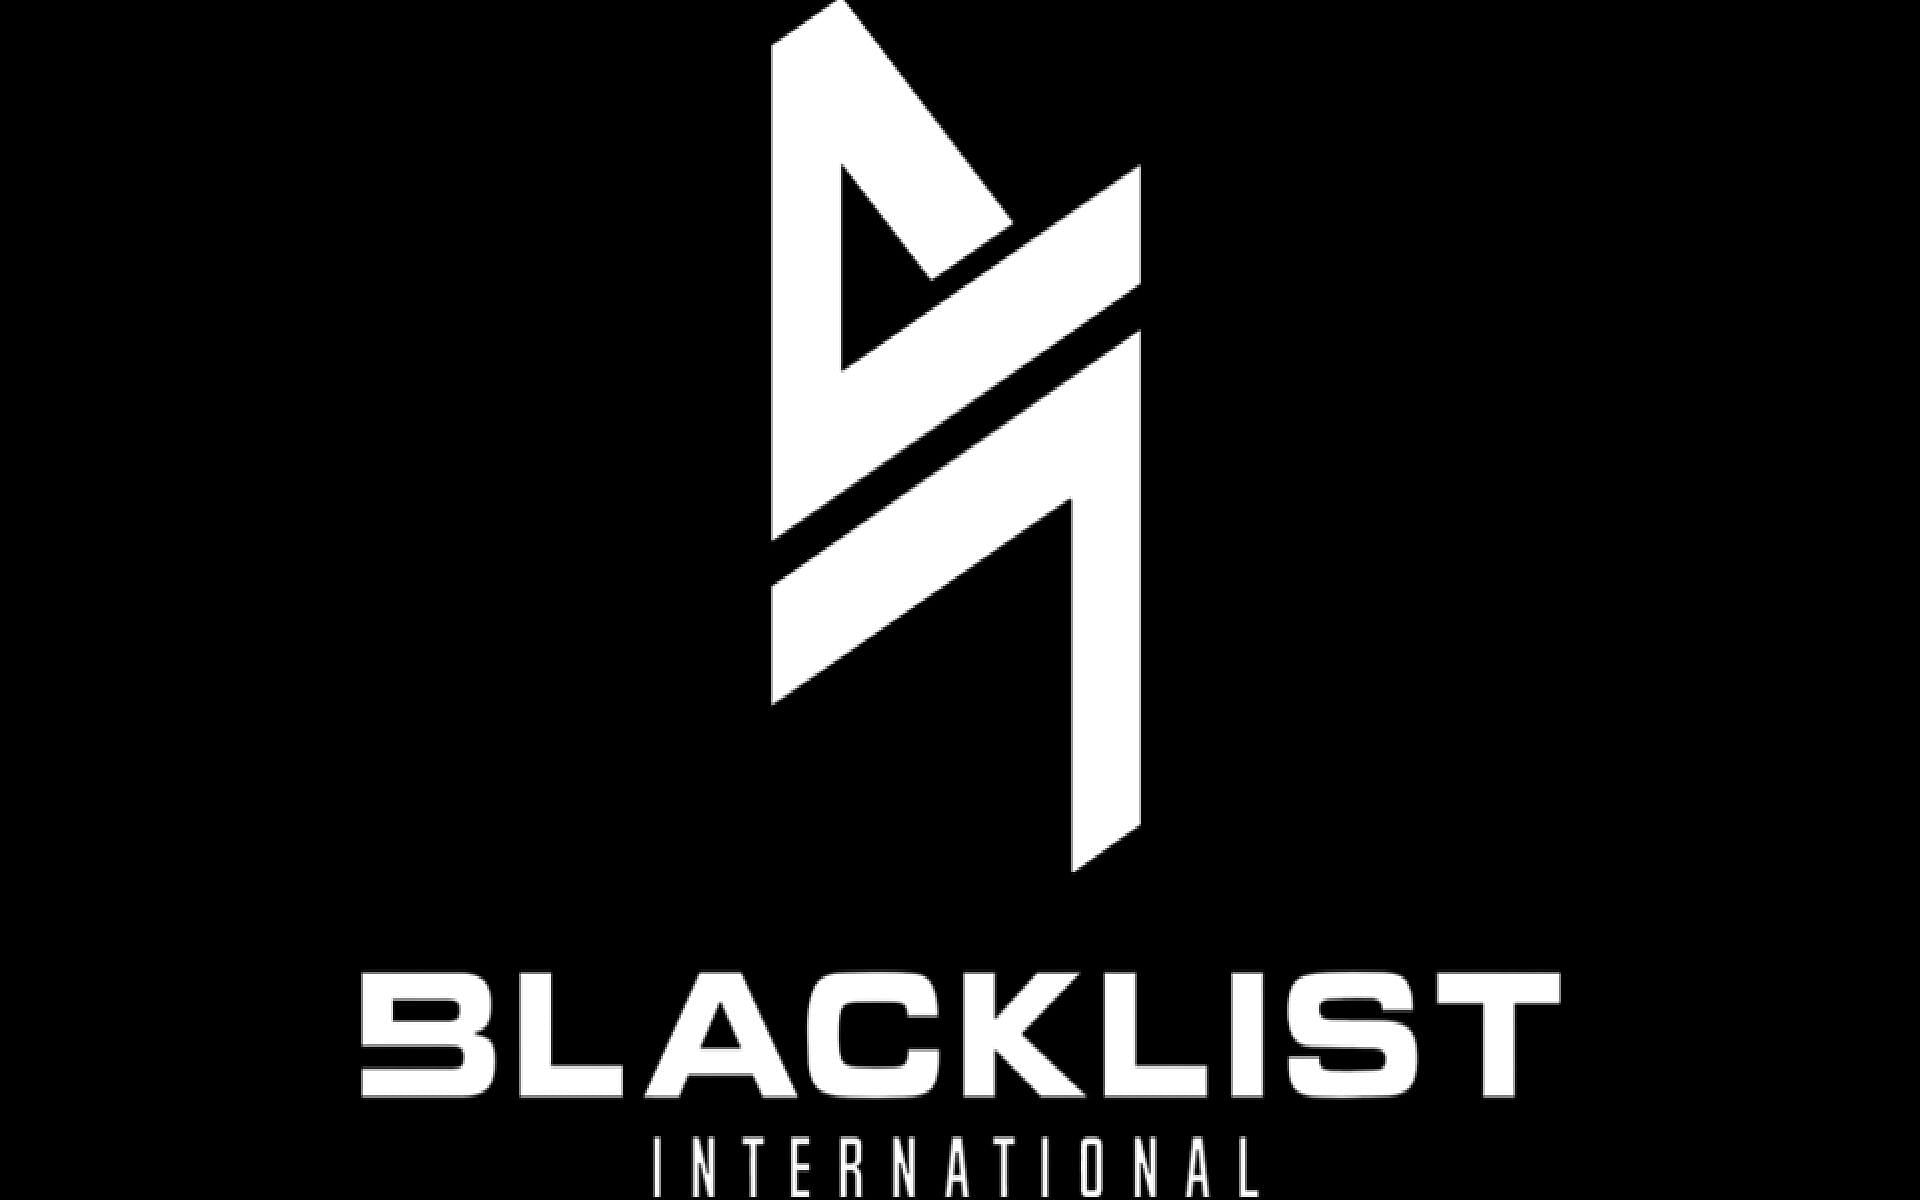 Blacklist Internation will try to win the match to become table toppers from Group C (Image via BLCK Intl.)